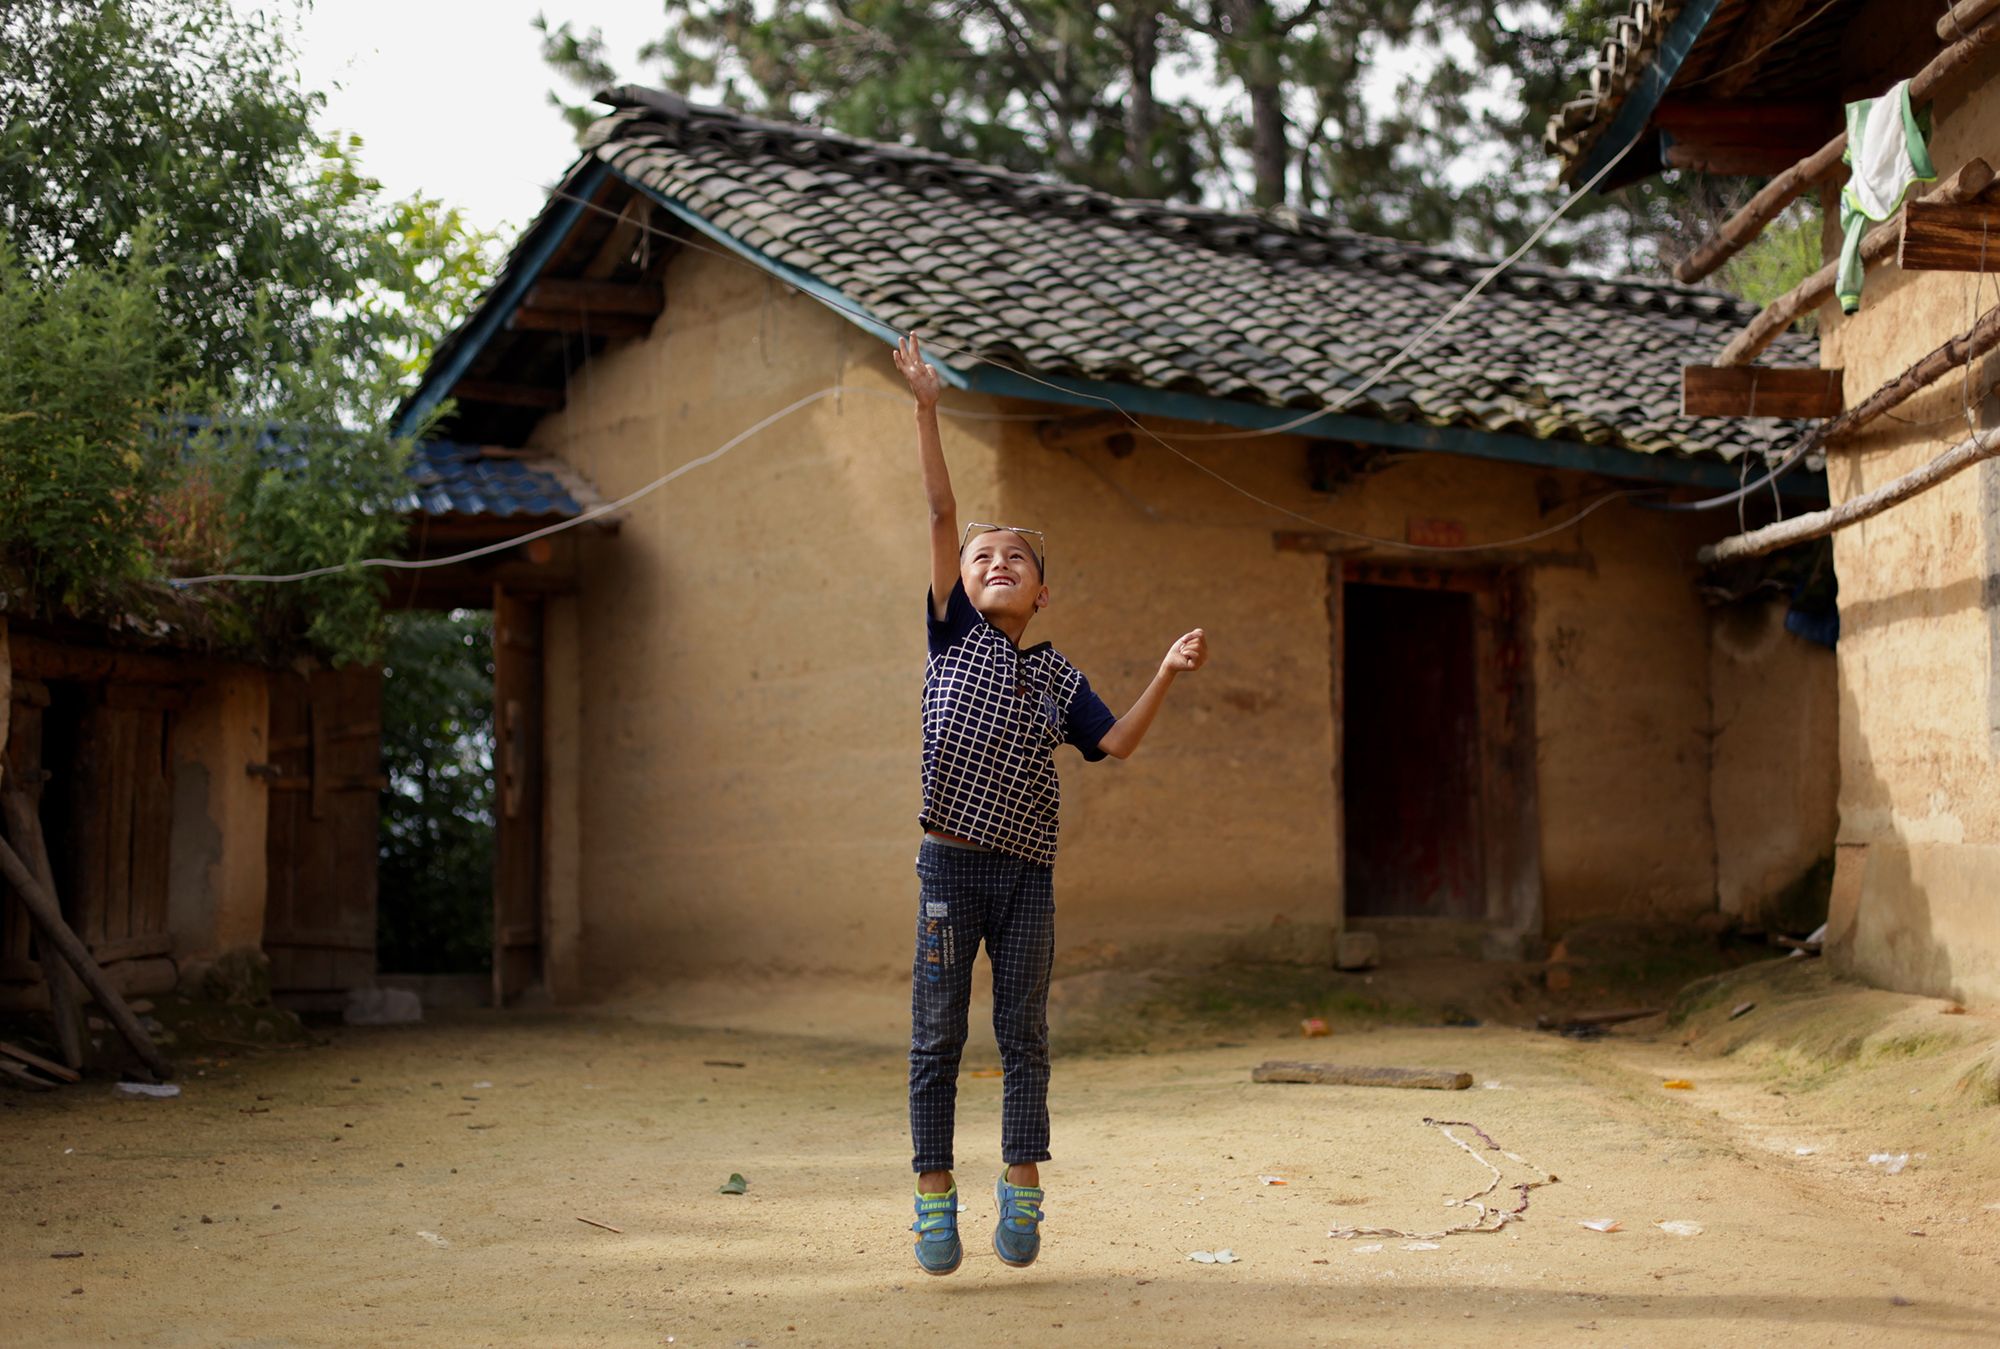 Eight-year-old Wang Jie plays in the courtyard of his family's farmhouse in Liangshan prefecture, Sichuan province. Image by Max Duncan. China, 2016. 